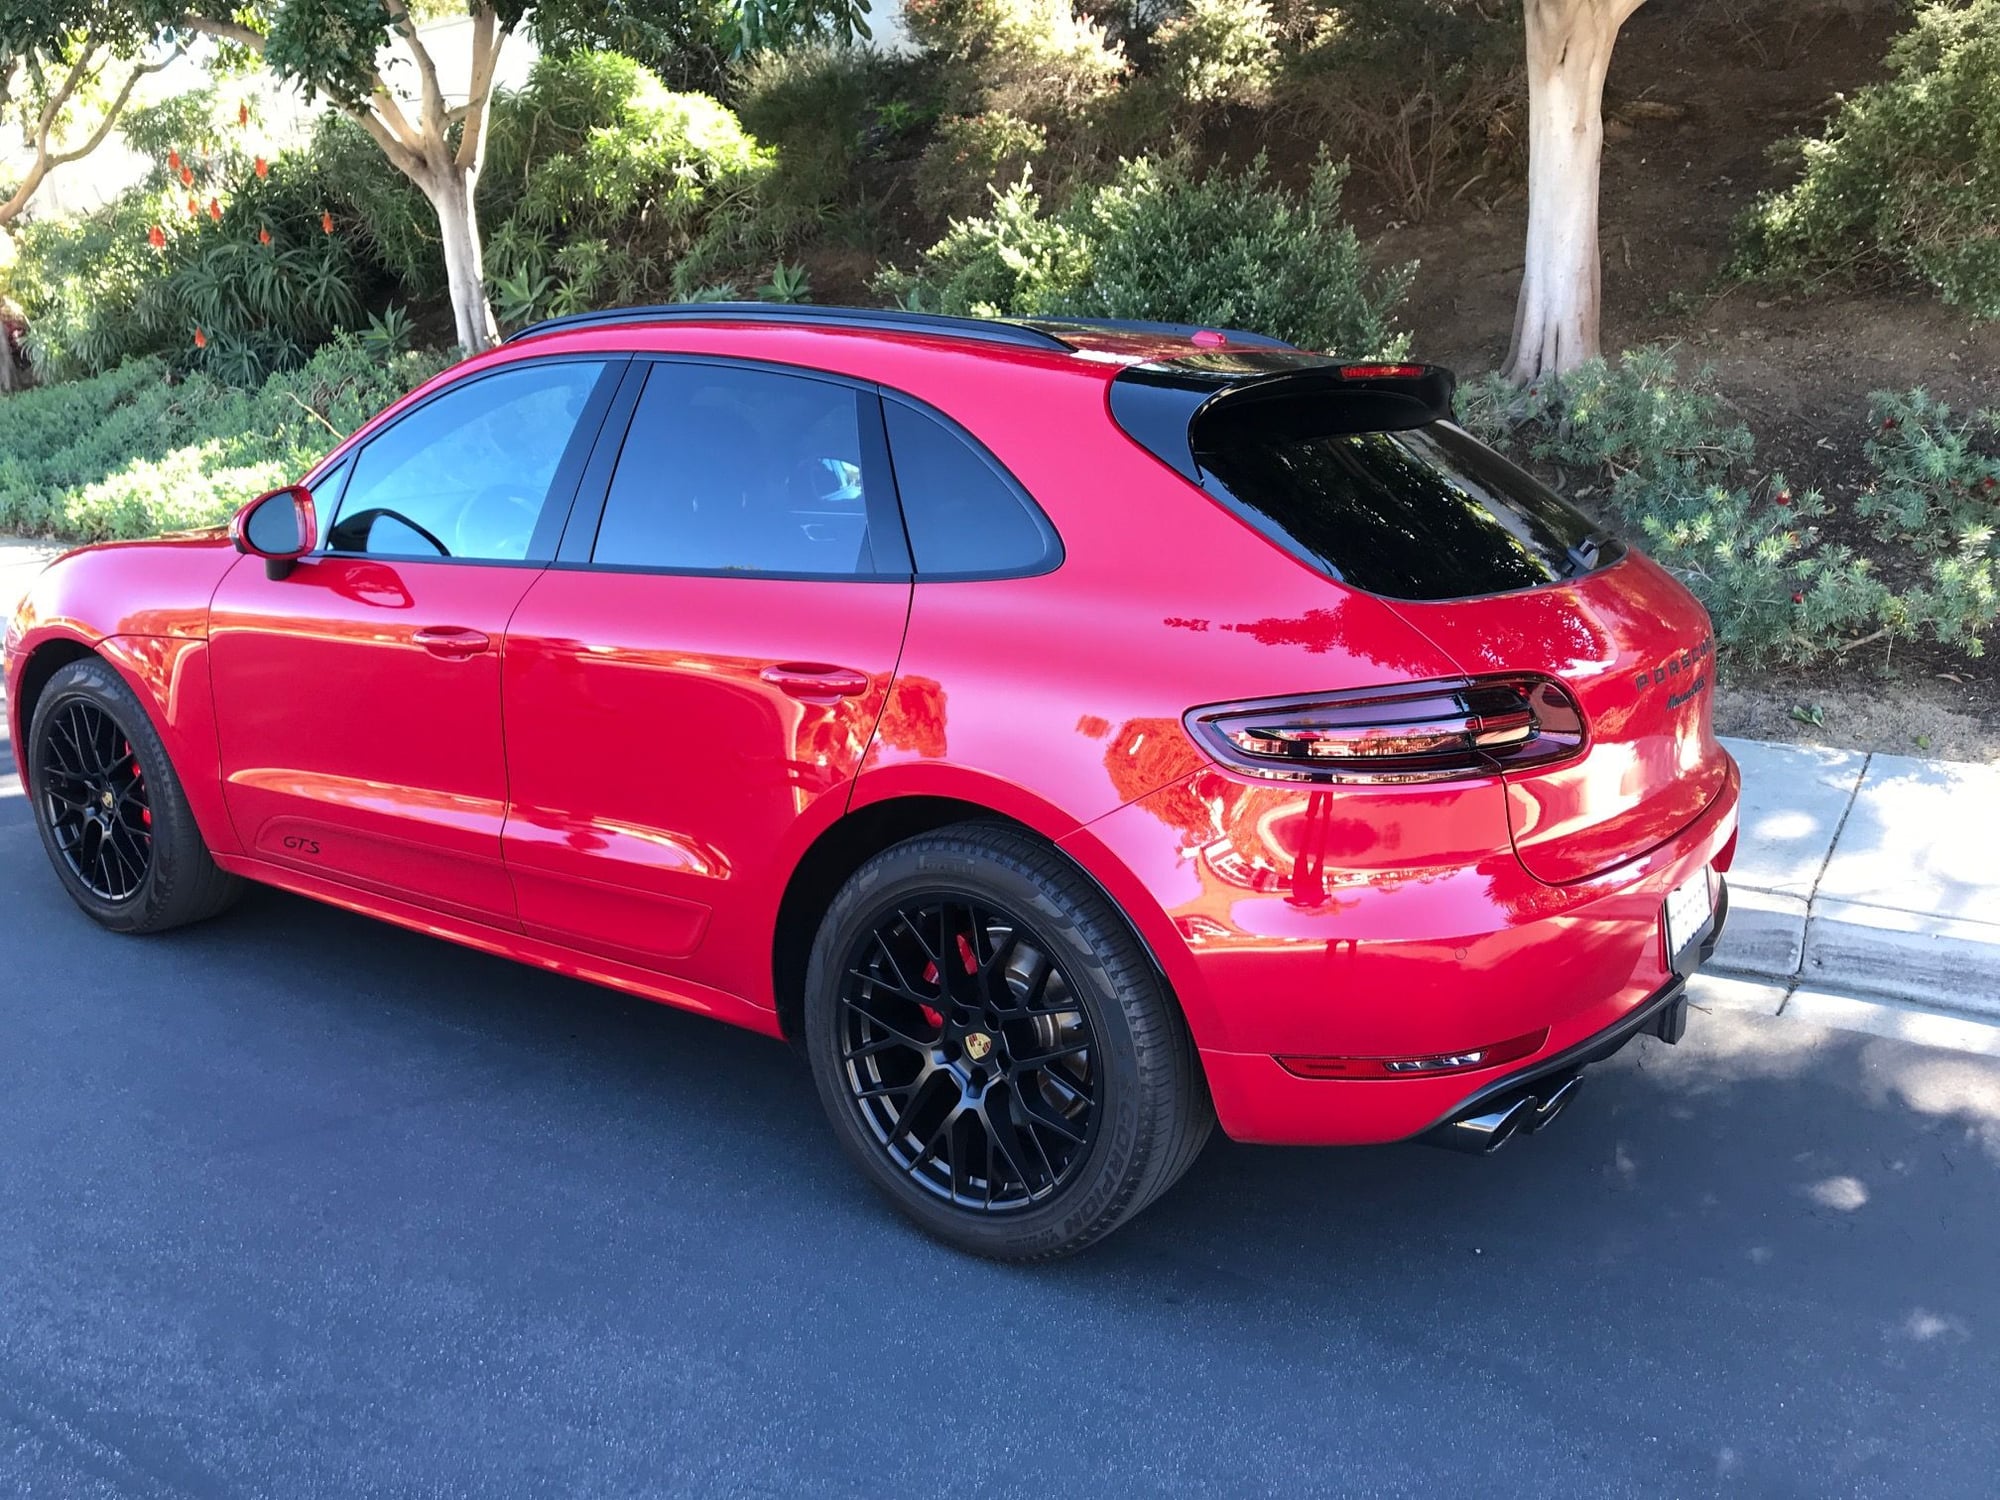 2017 Porsche Macan - 2017 Macan GTS - Used - VIN wp1ag2a57hlb52761 - 23,400 Miles - 6 cyl - AWD - Automatic - SUV - Red - Carlsbad, CA 92011, United States